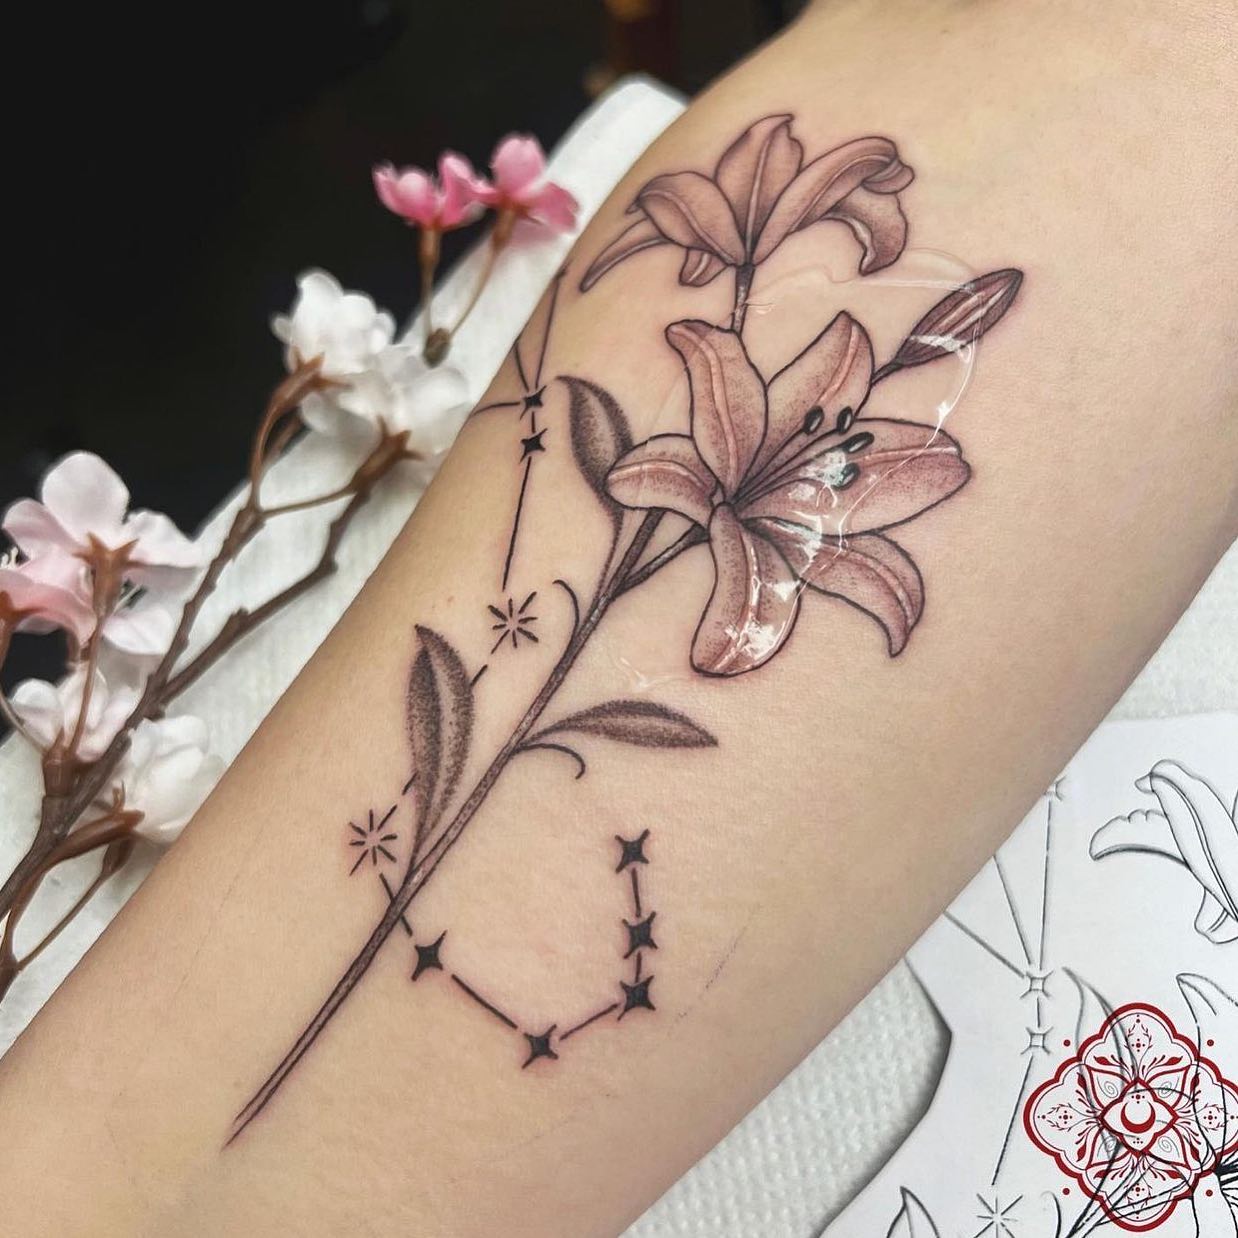 Lilies & Scorpio constellation by our lovely resident Thais 🌸🦂

📲 thaisblanc 

If you would like to get tattooed by Thais, then please email her directly for a quote or fill out the tattoo enquiry form on our website 💗

                        barber_dts easytattoo_uk eternalink dynamiccolor lockdownneedle stencilstuff        